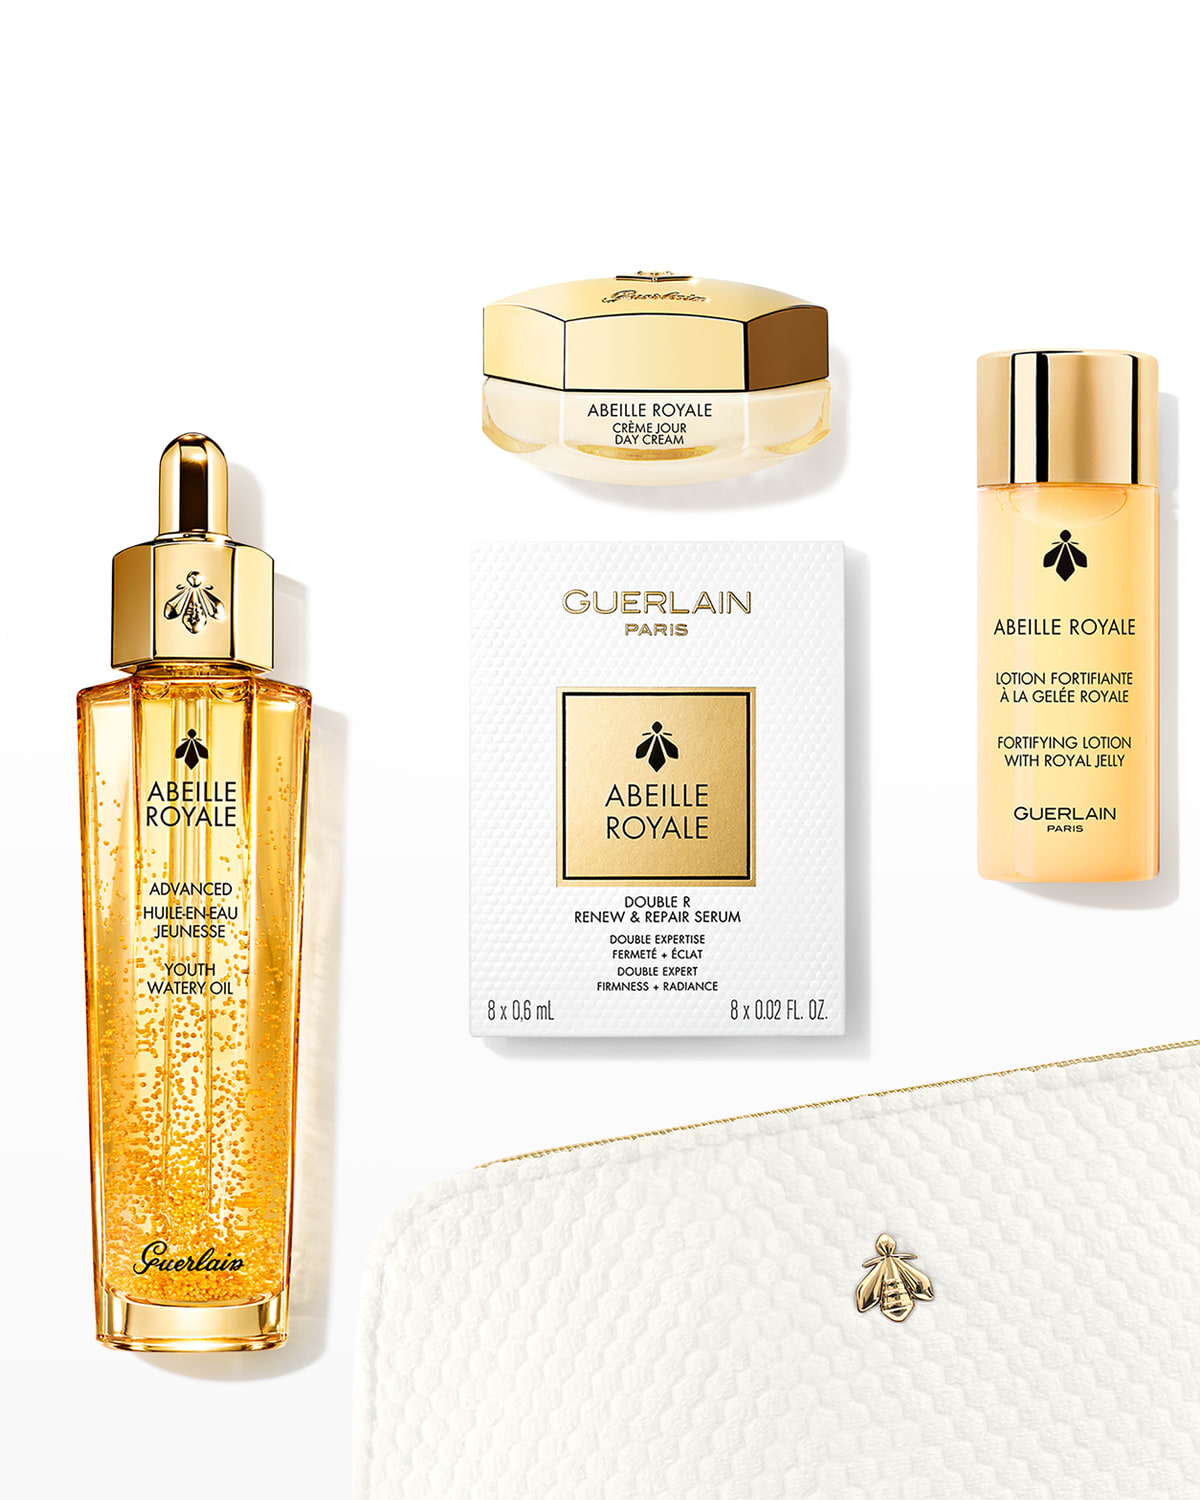 Abeille Royale Advanced Youth Watery Oil Discovery Set ($229 Value)